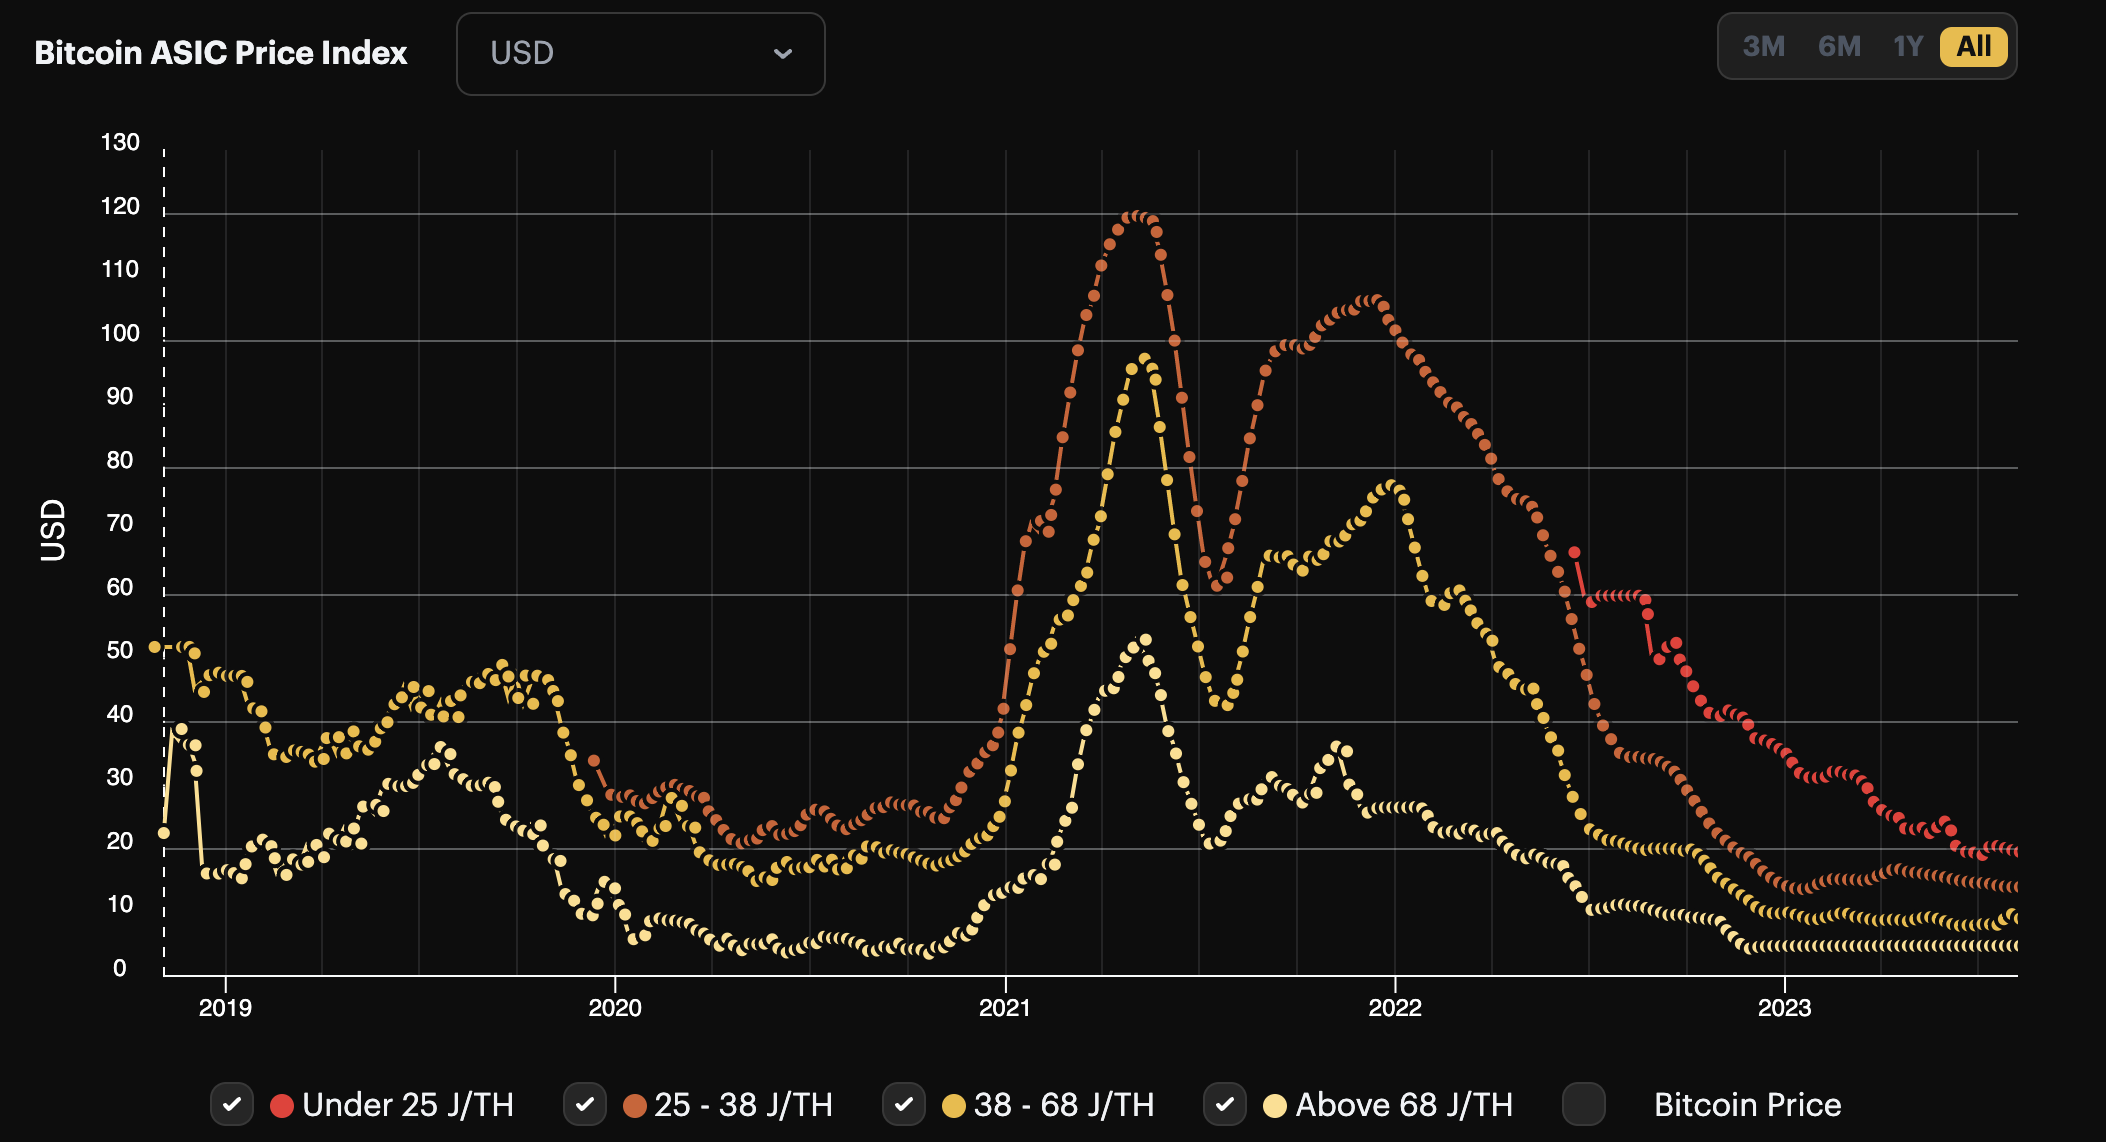 Our Bitcoin ASIC Price Index averages asking prices for mining rigs from various brokerage sources